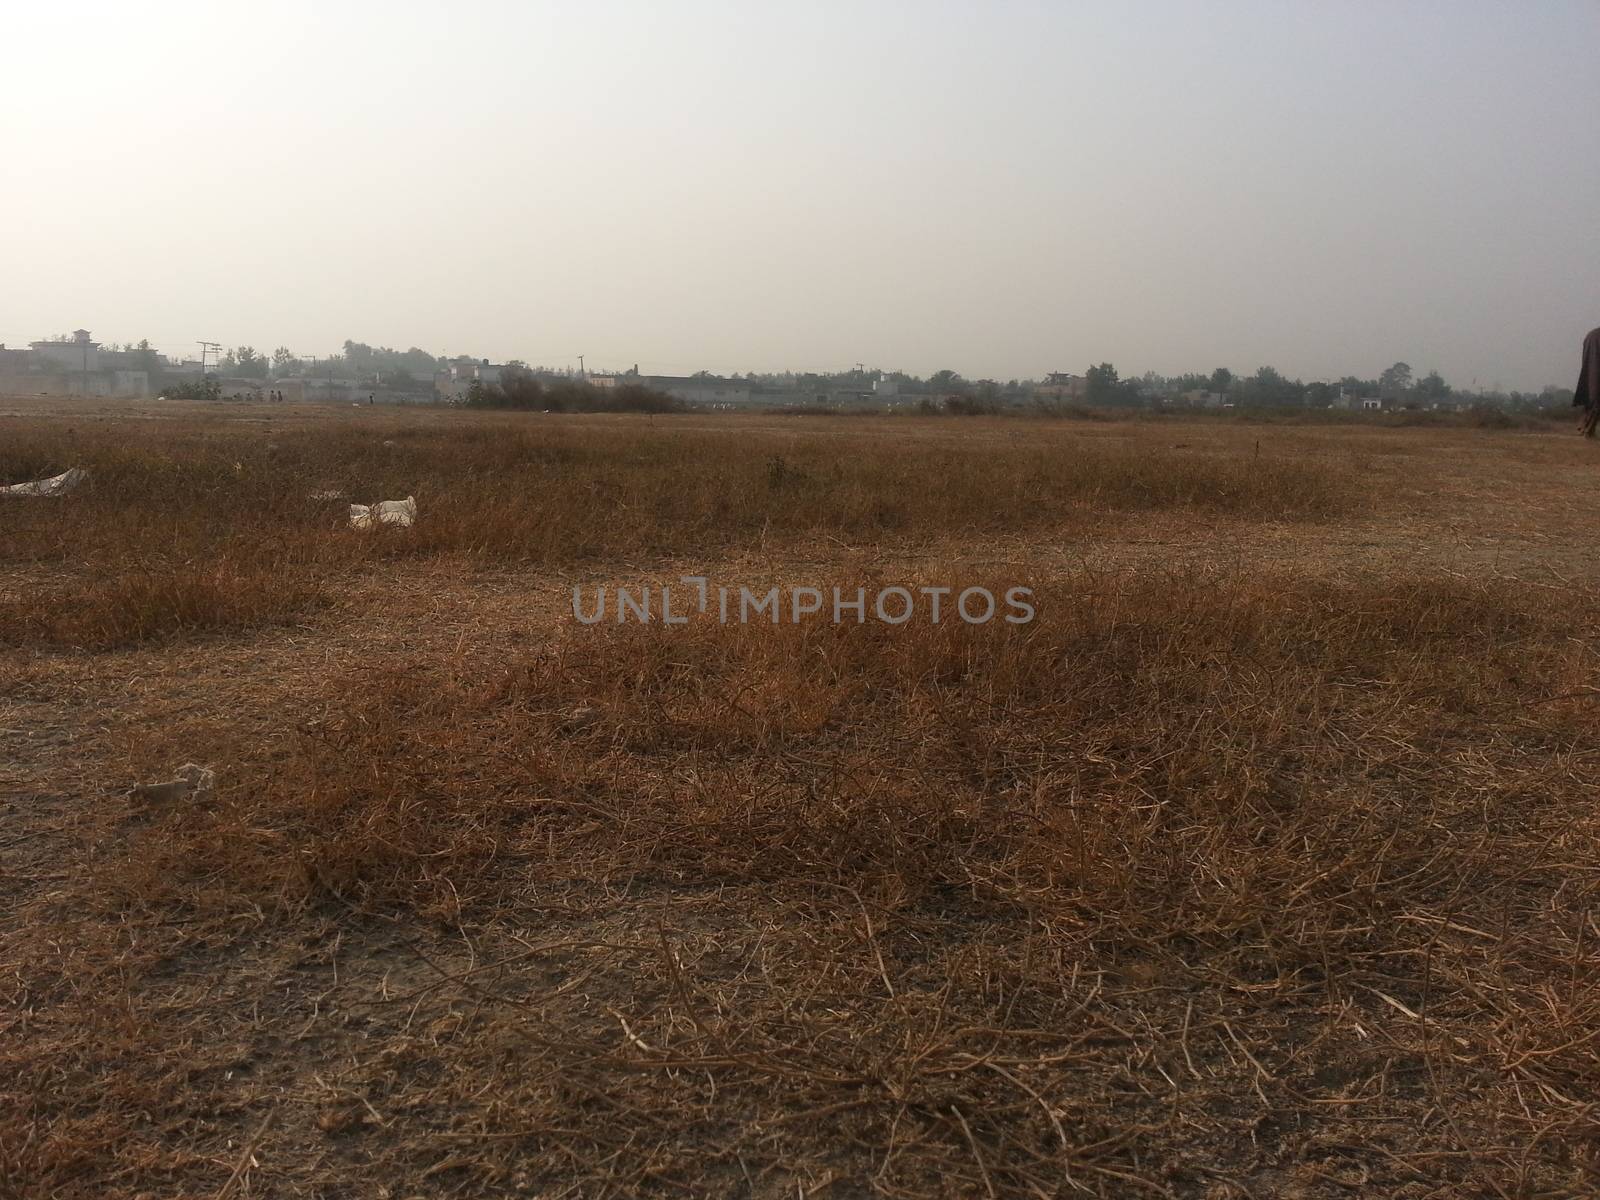 Arid brown grassland view of a rural land in hot weather on sunny day under blue sky